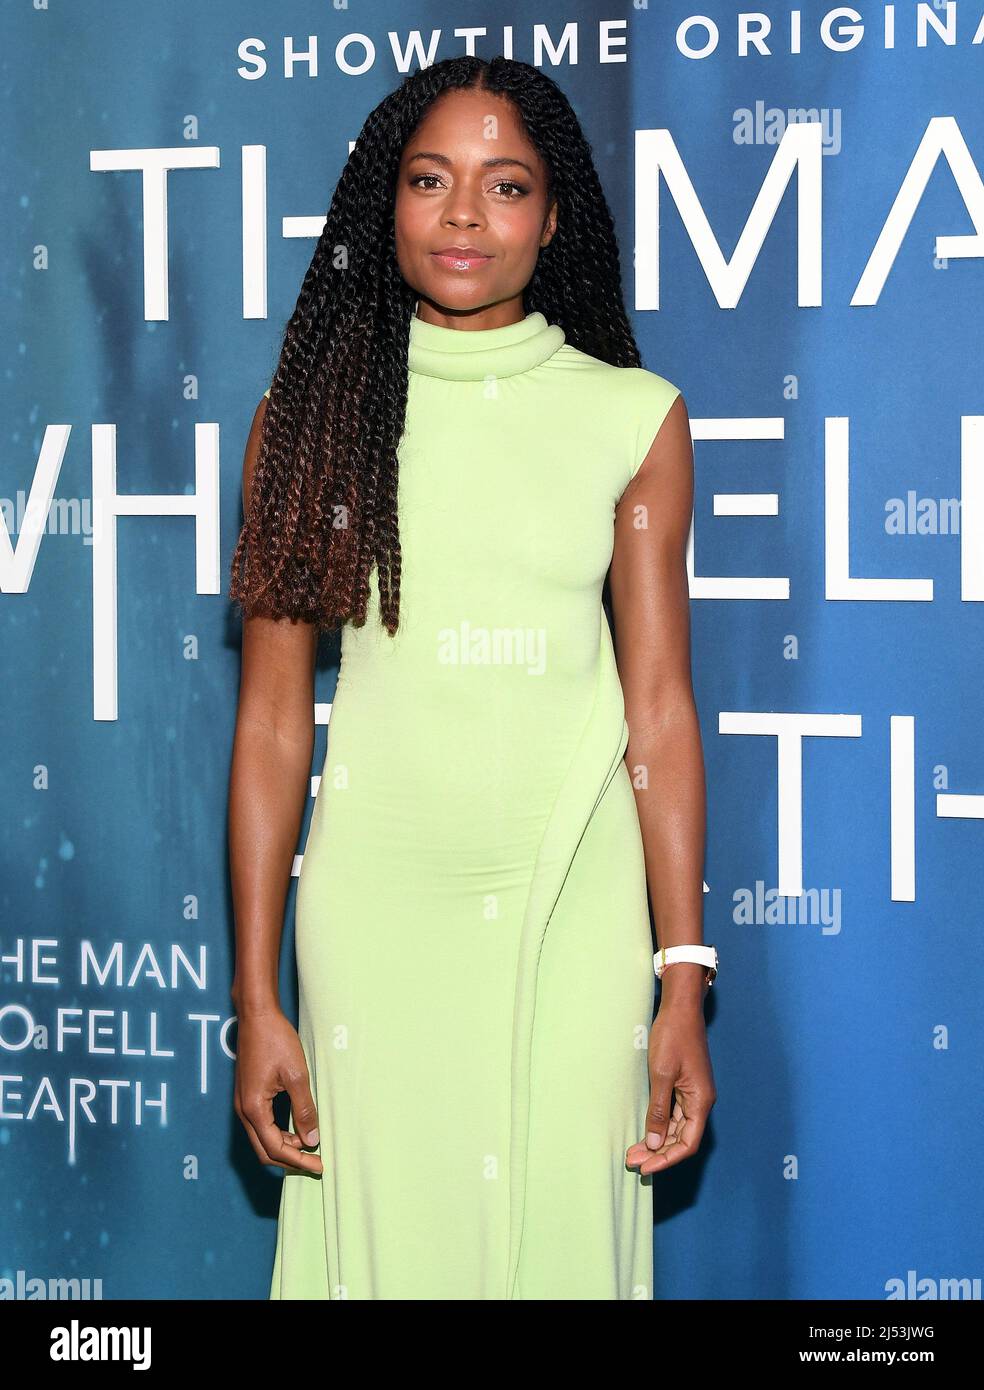 new-york-new-york-usa-19th-apr-2022-naomie-harris-and-cast-attend-the-new-york-premiere-of-the-man-who-fell-to-earth-credit-john-palmermedia-punchalamy-live-news-2J53JWG.jpg